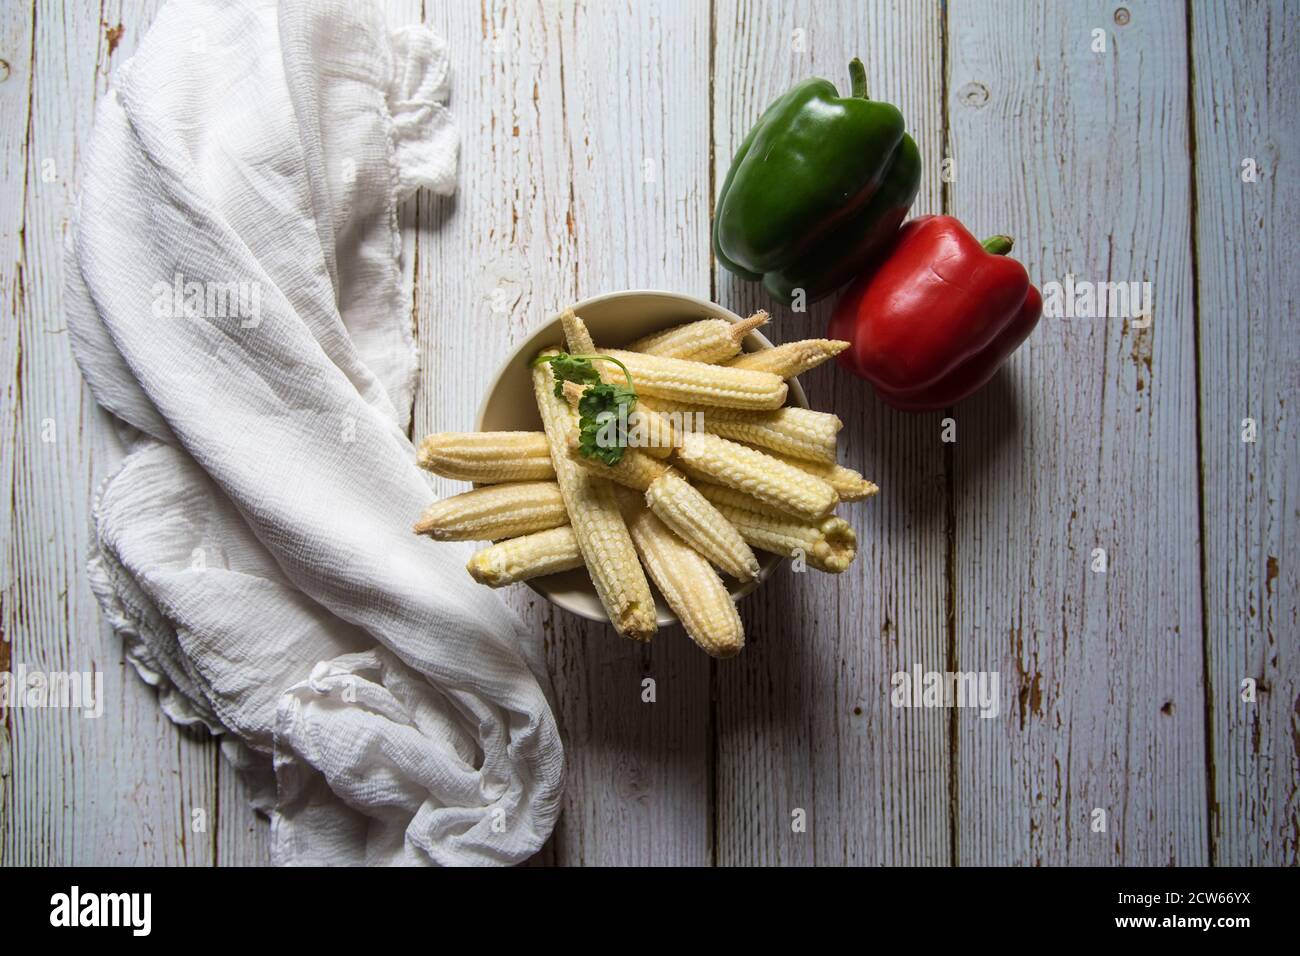 Top view of baby corns and bell peppers on a background Stock Photo